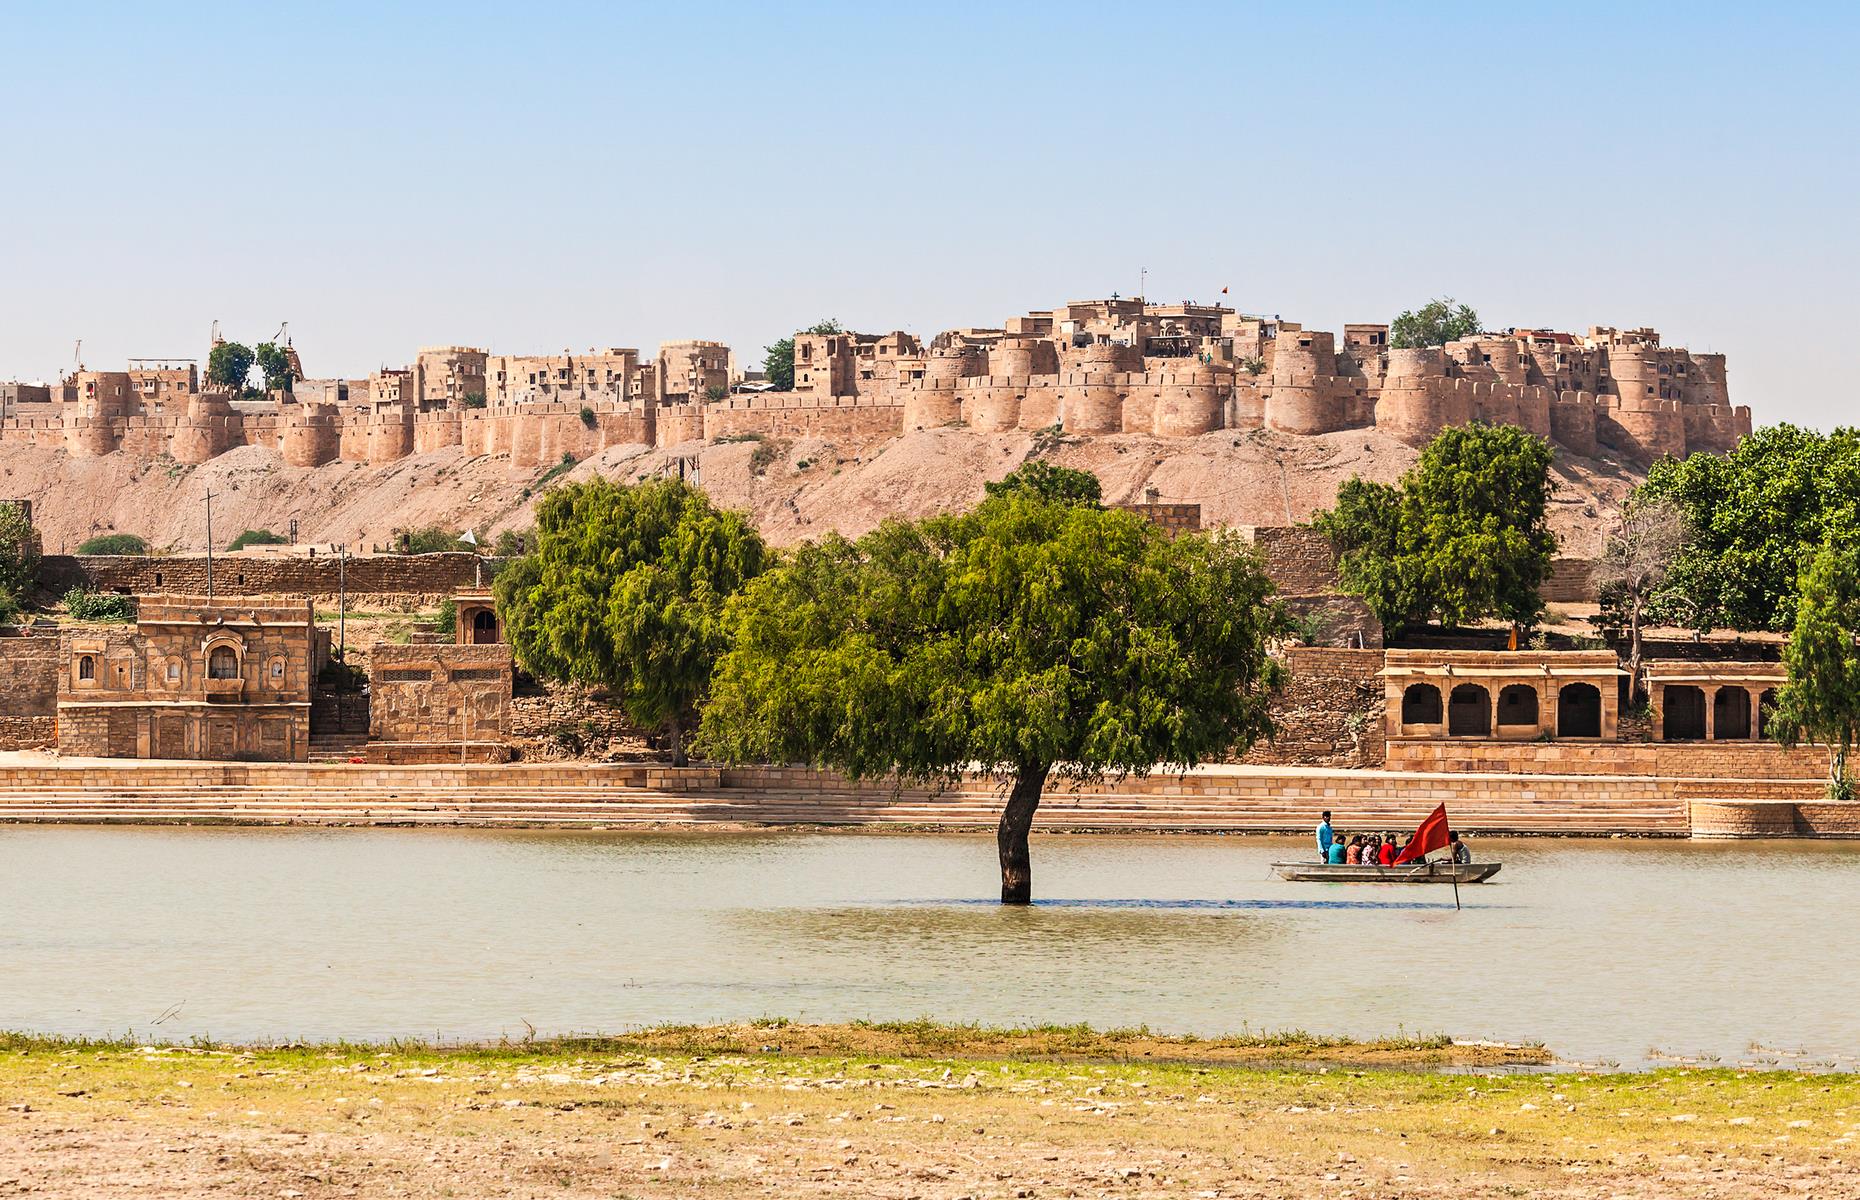 <p>Watch the sunrise over the sand dunes at the honey-hued fort city which rises magnificently out of the Thar Desert. The color of the sandstone architecture has earned Jaisalmer the tag of the Golden City. It's known for its grand havelis – former mansions of the city's wealthy merchants, embellished with exquisite carvings.</p>